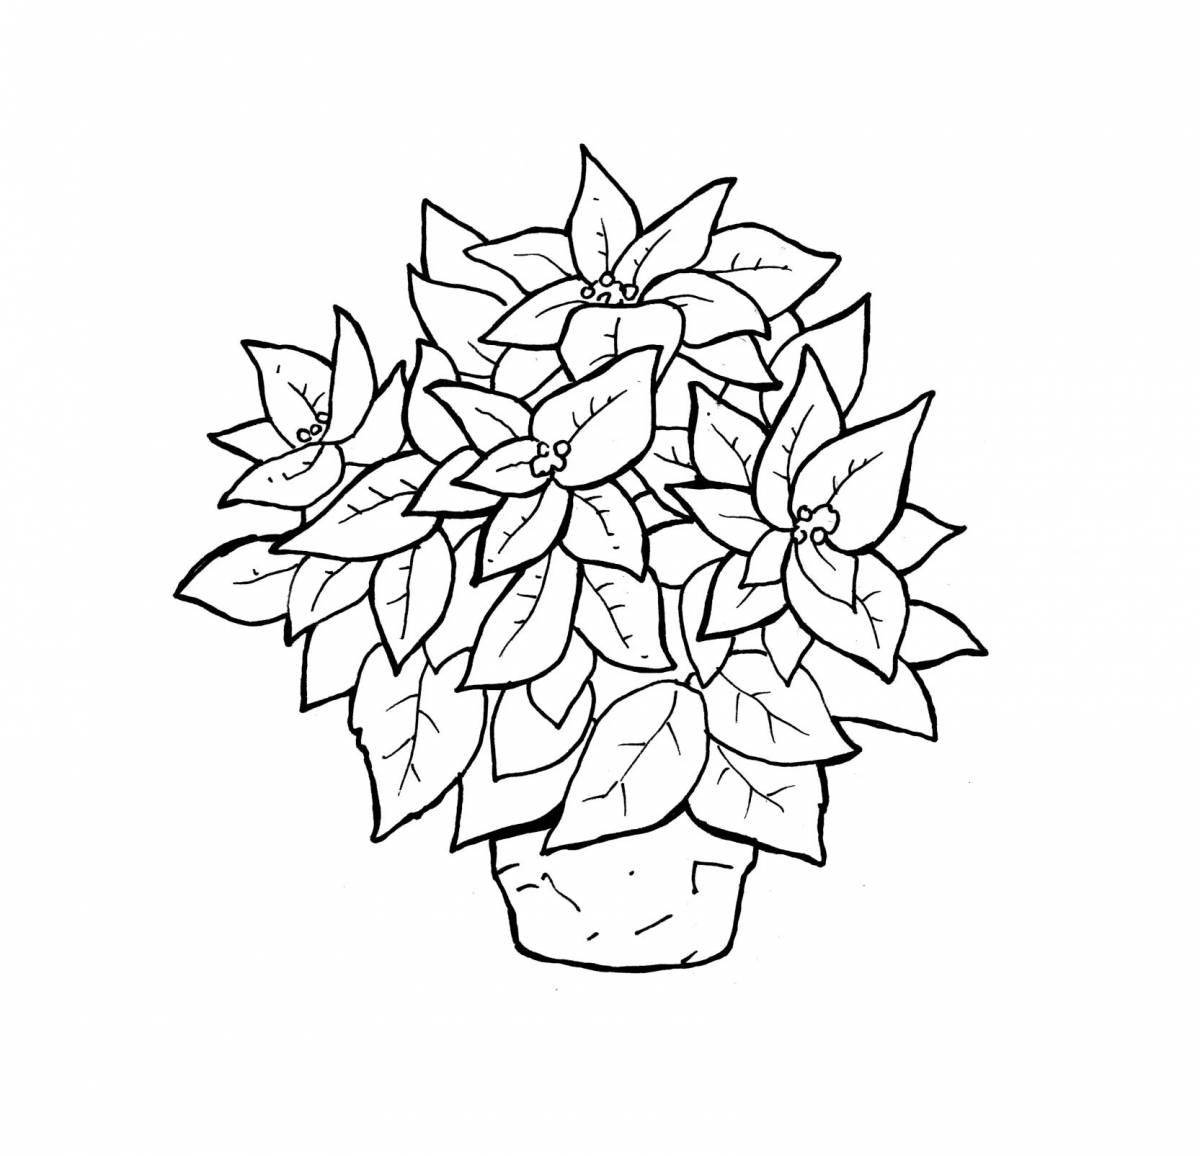 Coloring book inviting indoor flower